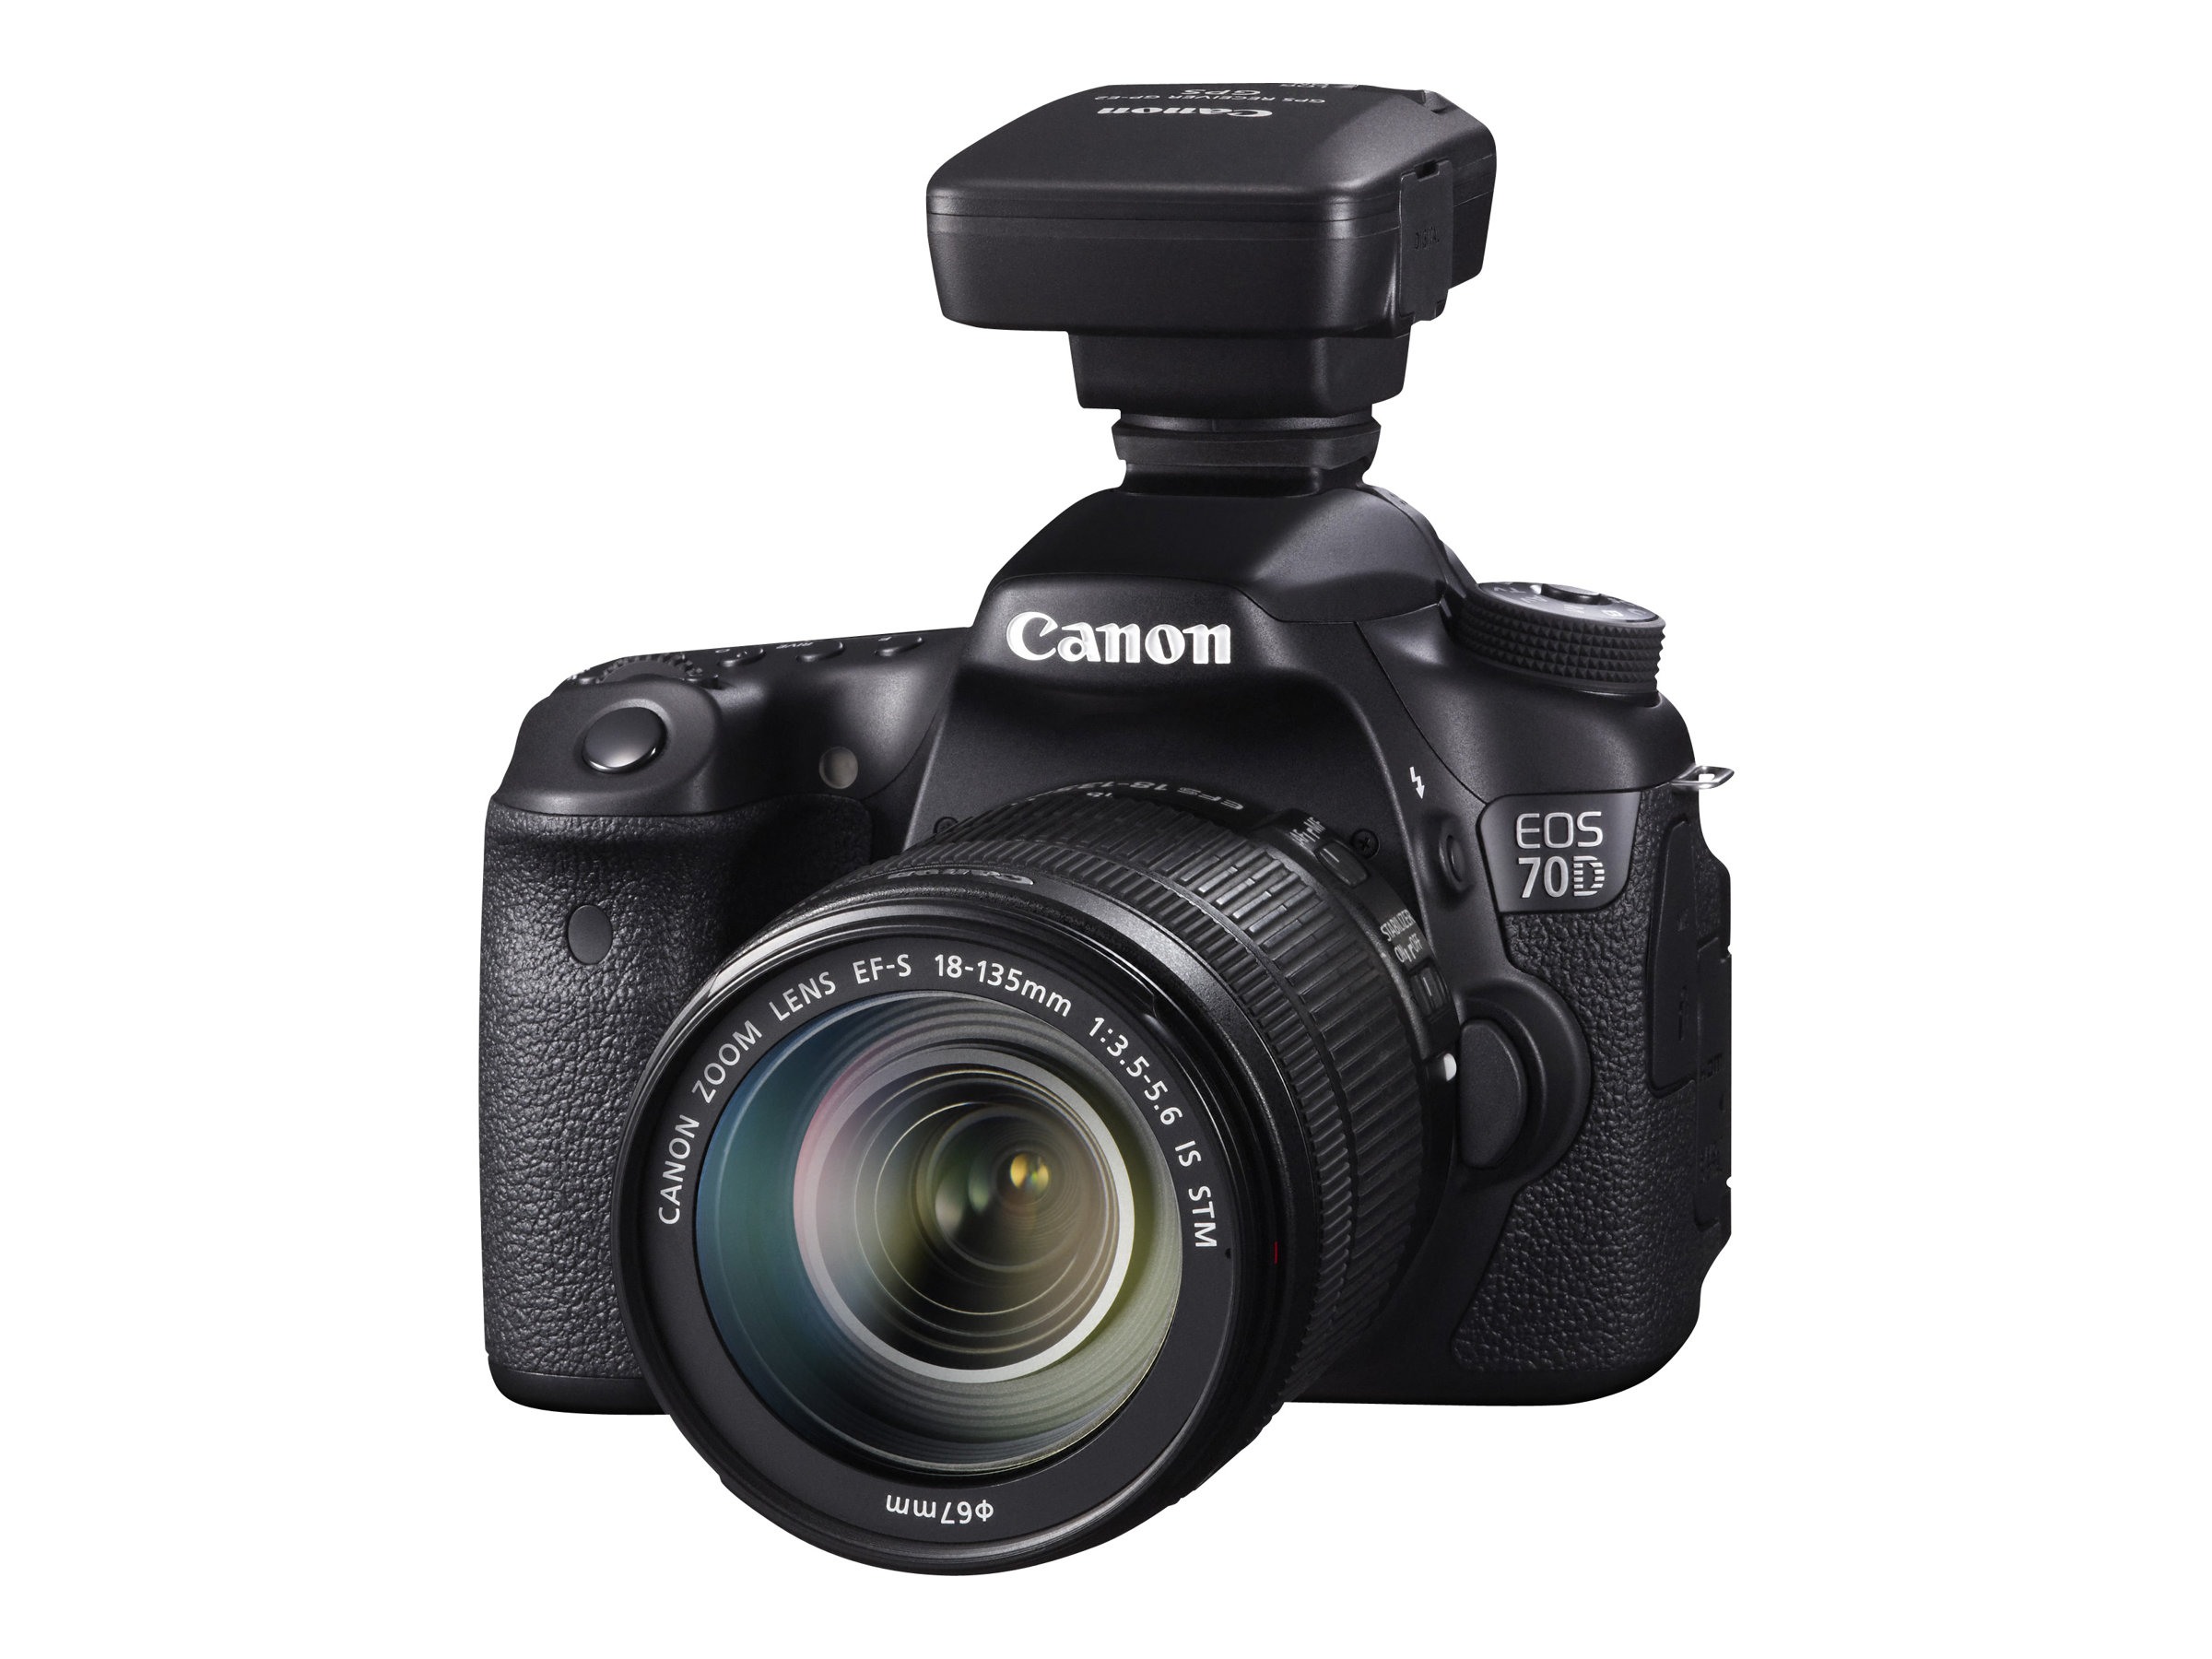 Canon EOS 70D - Digital camera - SLR - 20.2 MP - APS-C - 1080p - 7.5x optical zoom EF-S 18-135mm IS STM lens - Wi-Fi - image 3 of 15